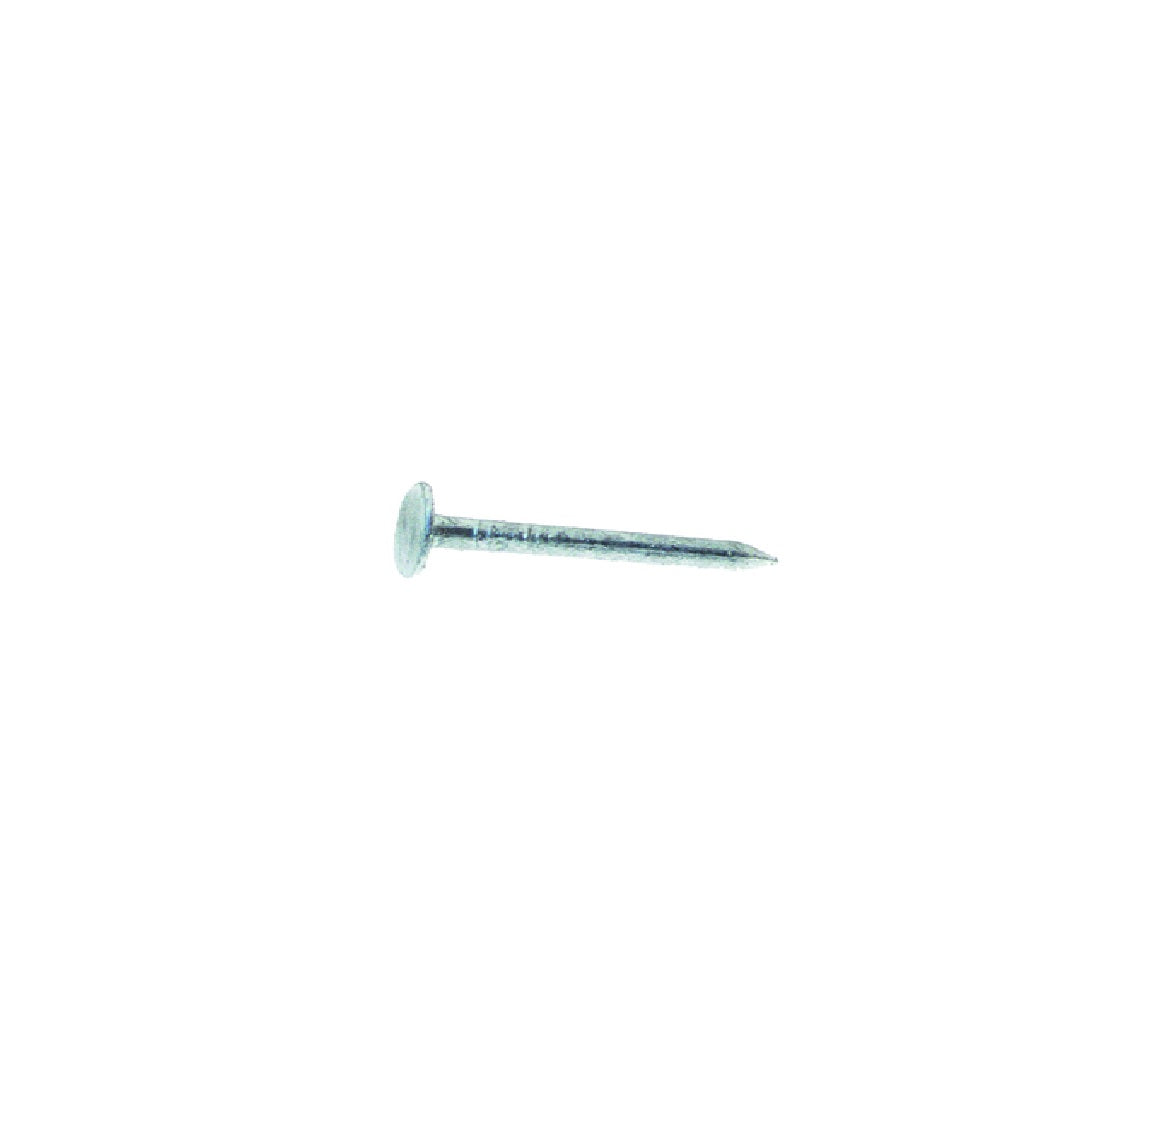 Grip-Rite 34HGRFG1 Roofing Hot-Dipped Galvanized Nail